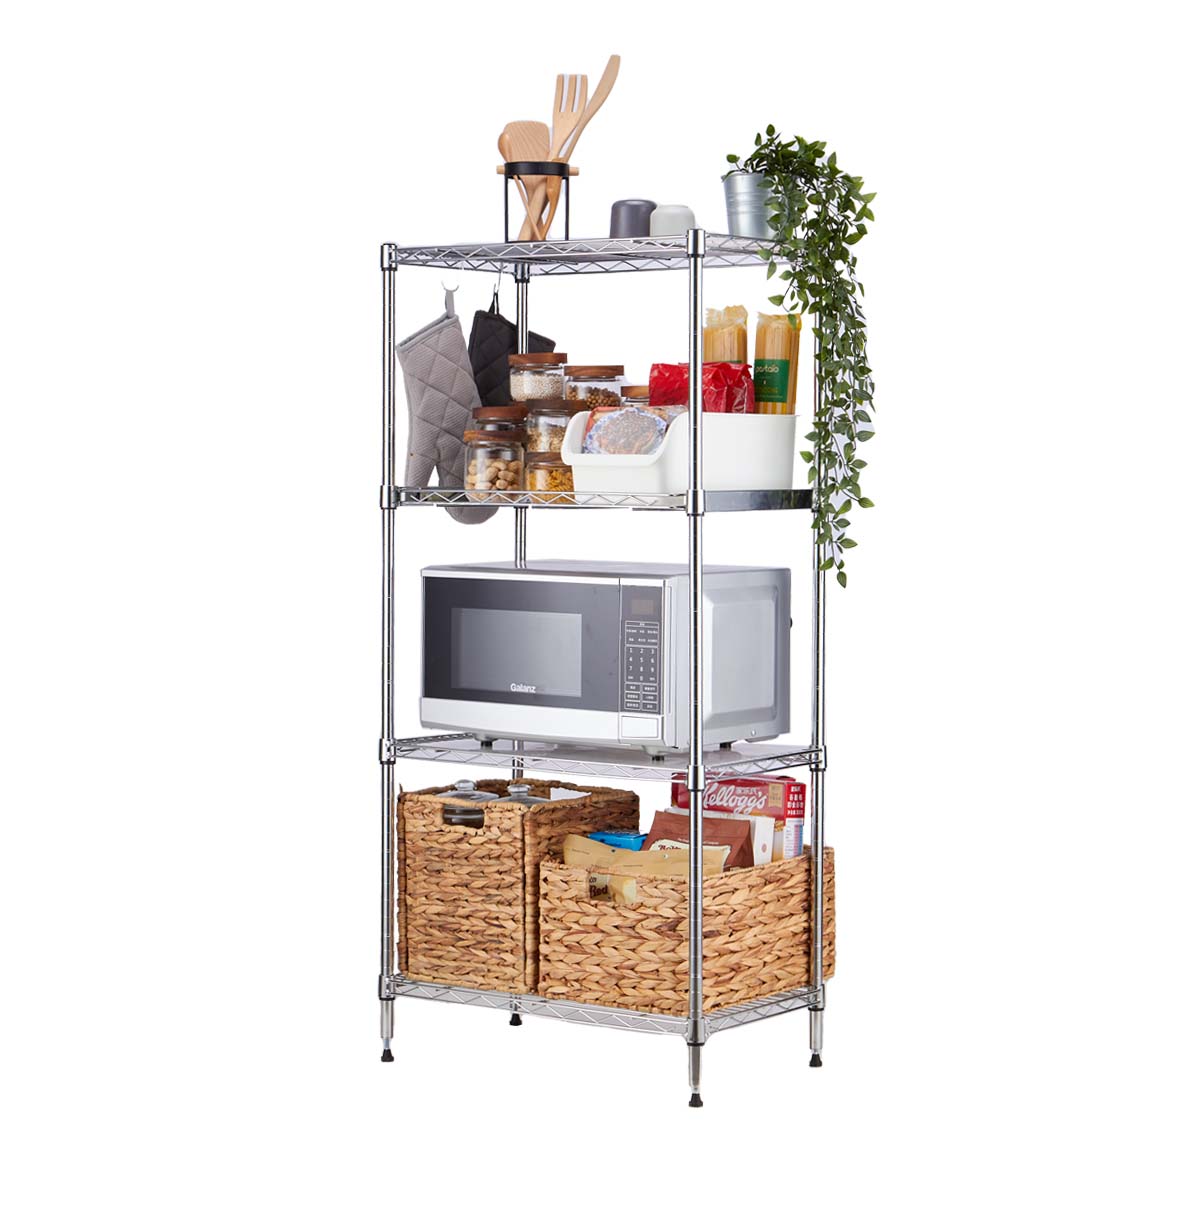 4-Tier Microwave Stand With Storage / Chrome Plated Wire Shelf / Chrome Wire Shelving Unit